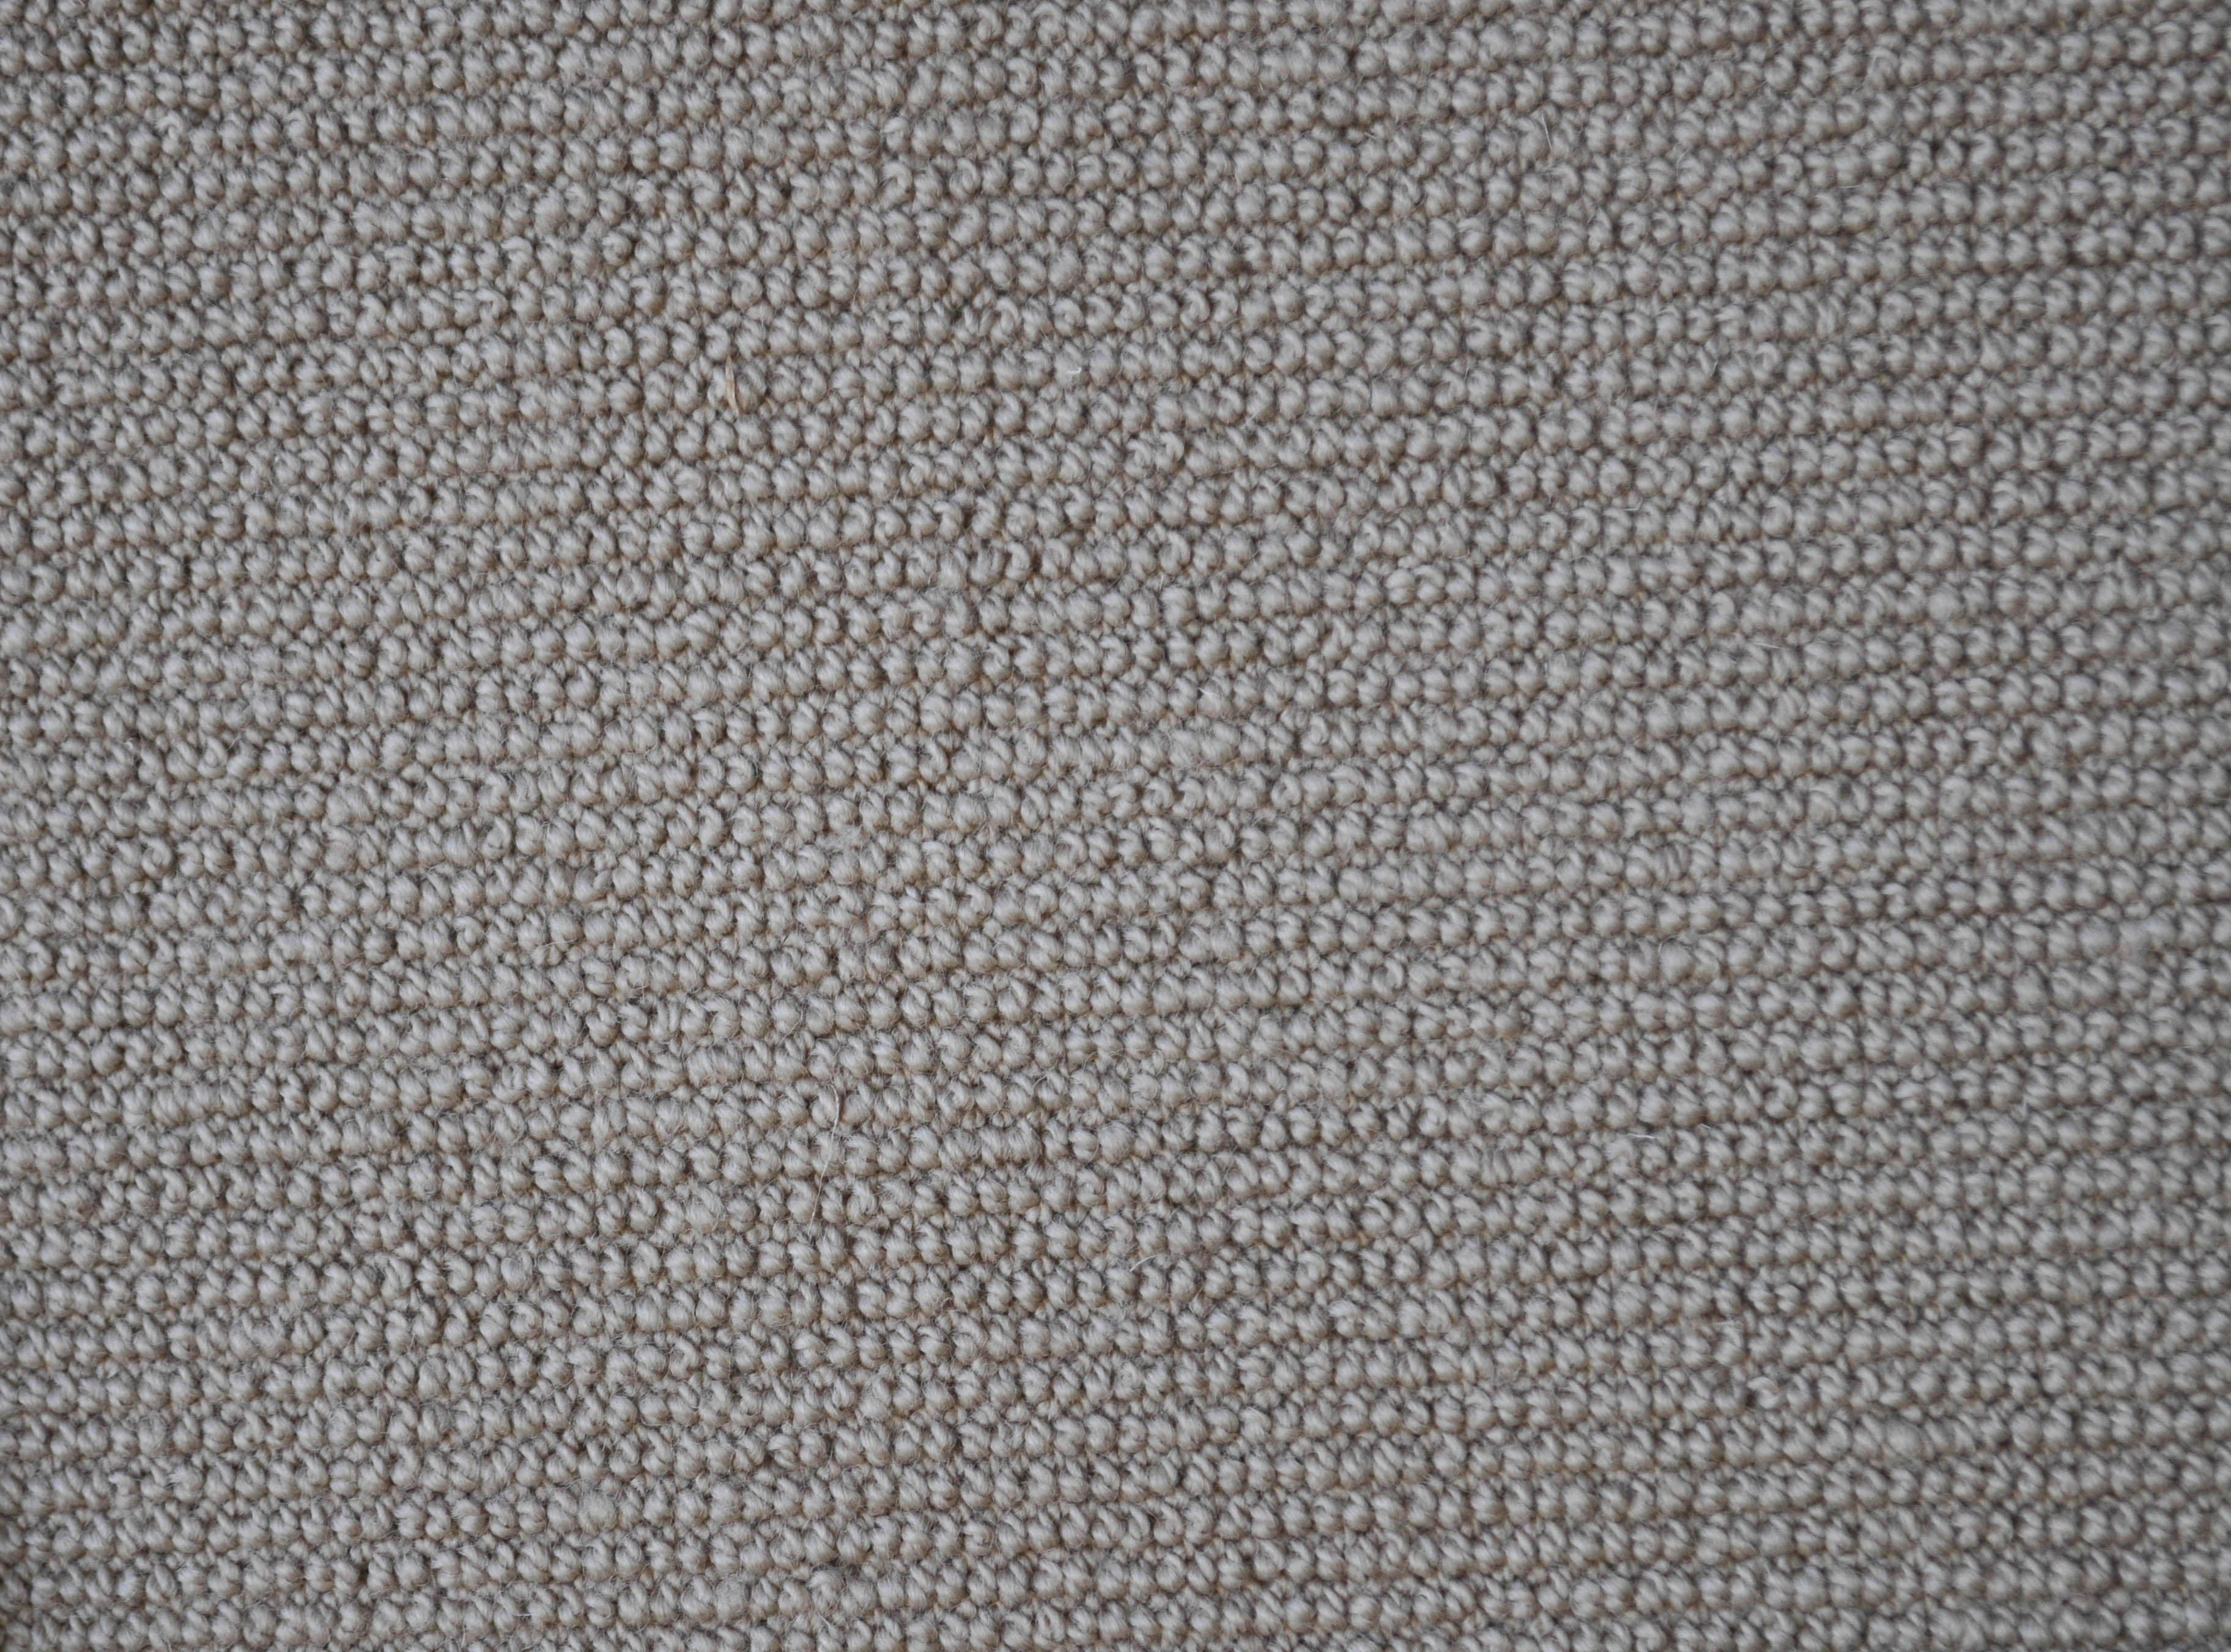  violet blue colored, 100% wool fibre, multi-level height pile, a sisal carpet called perfection on sale at Concord Floors.